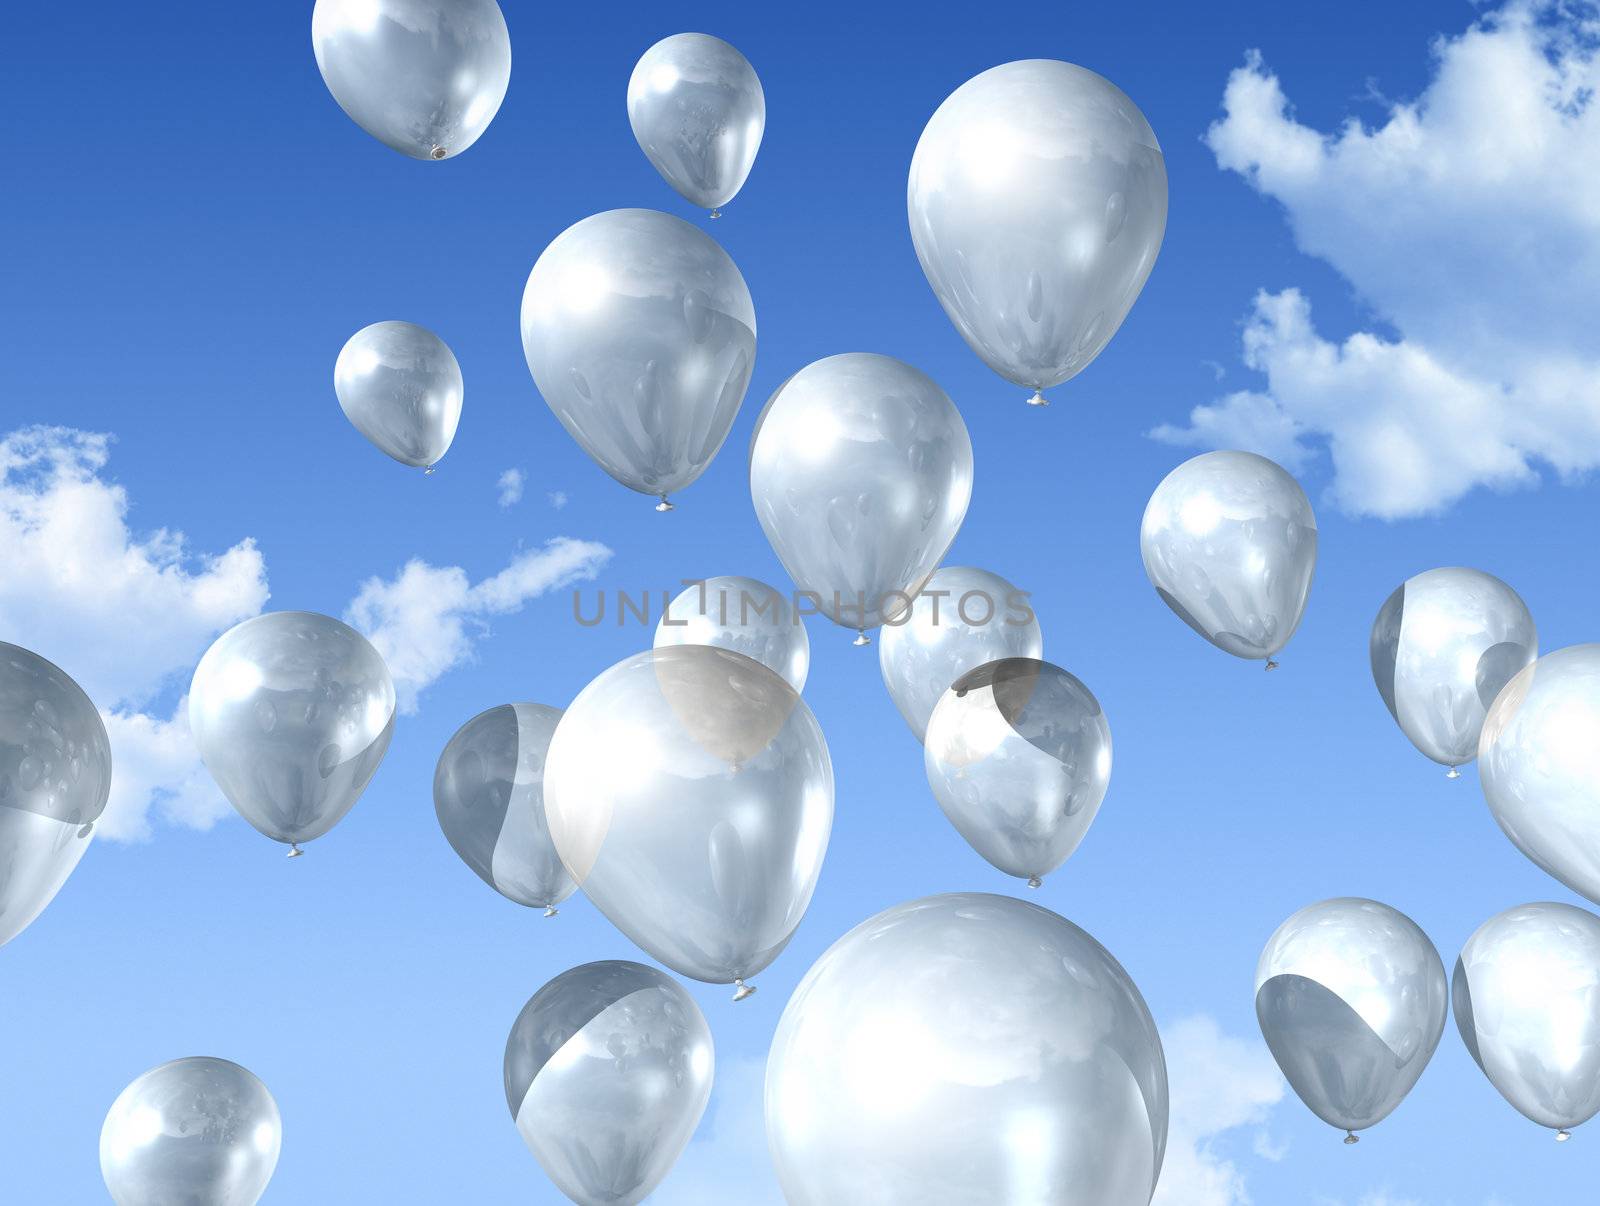 white balloons on a blue sky by daboost